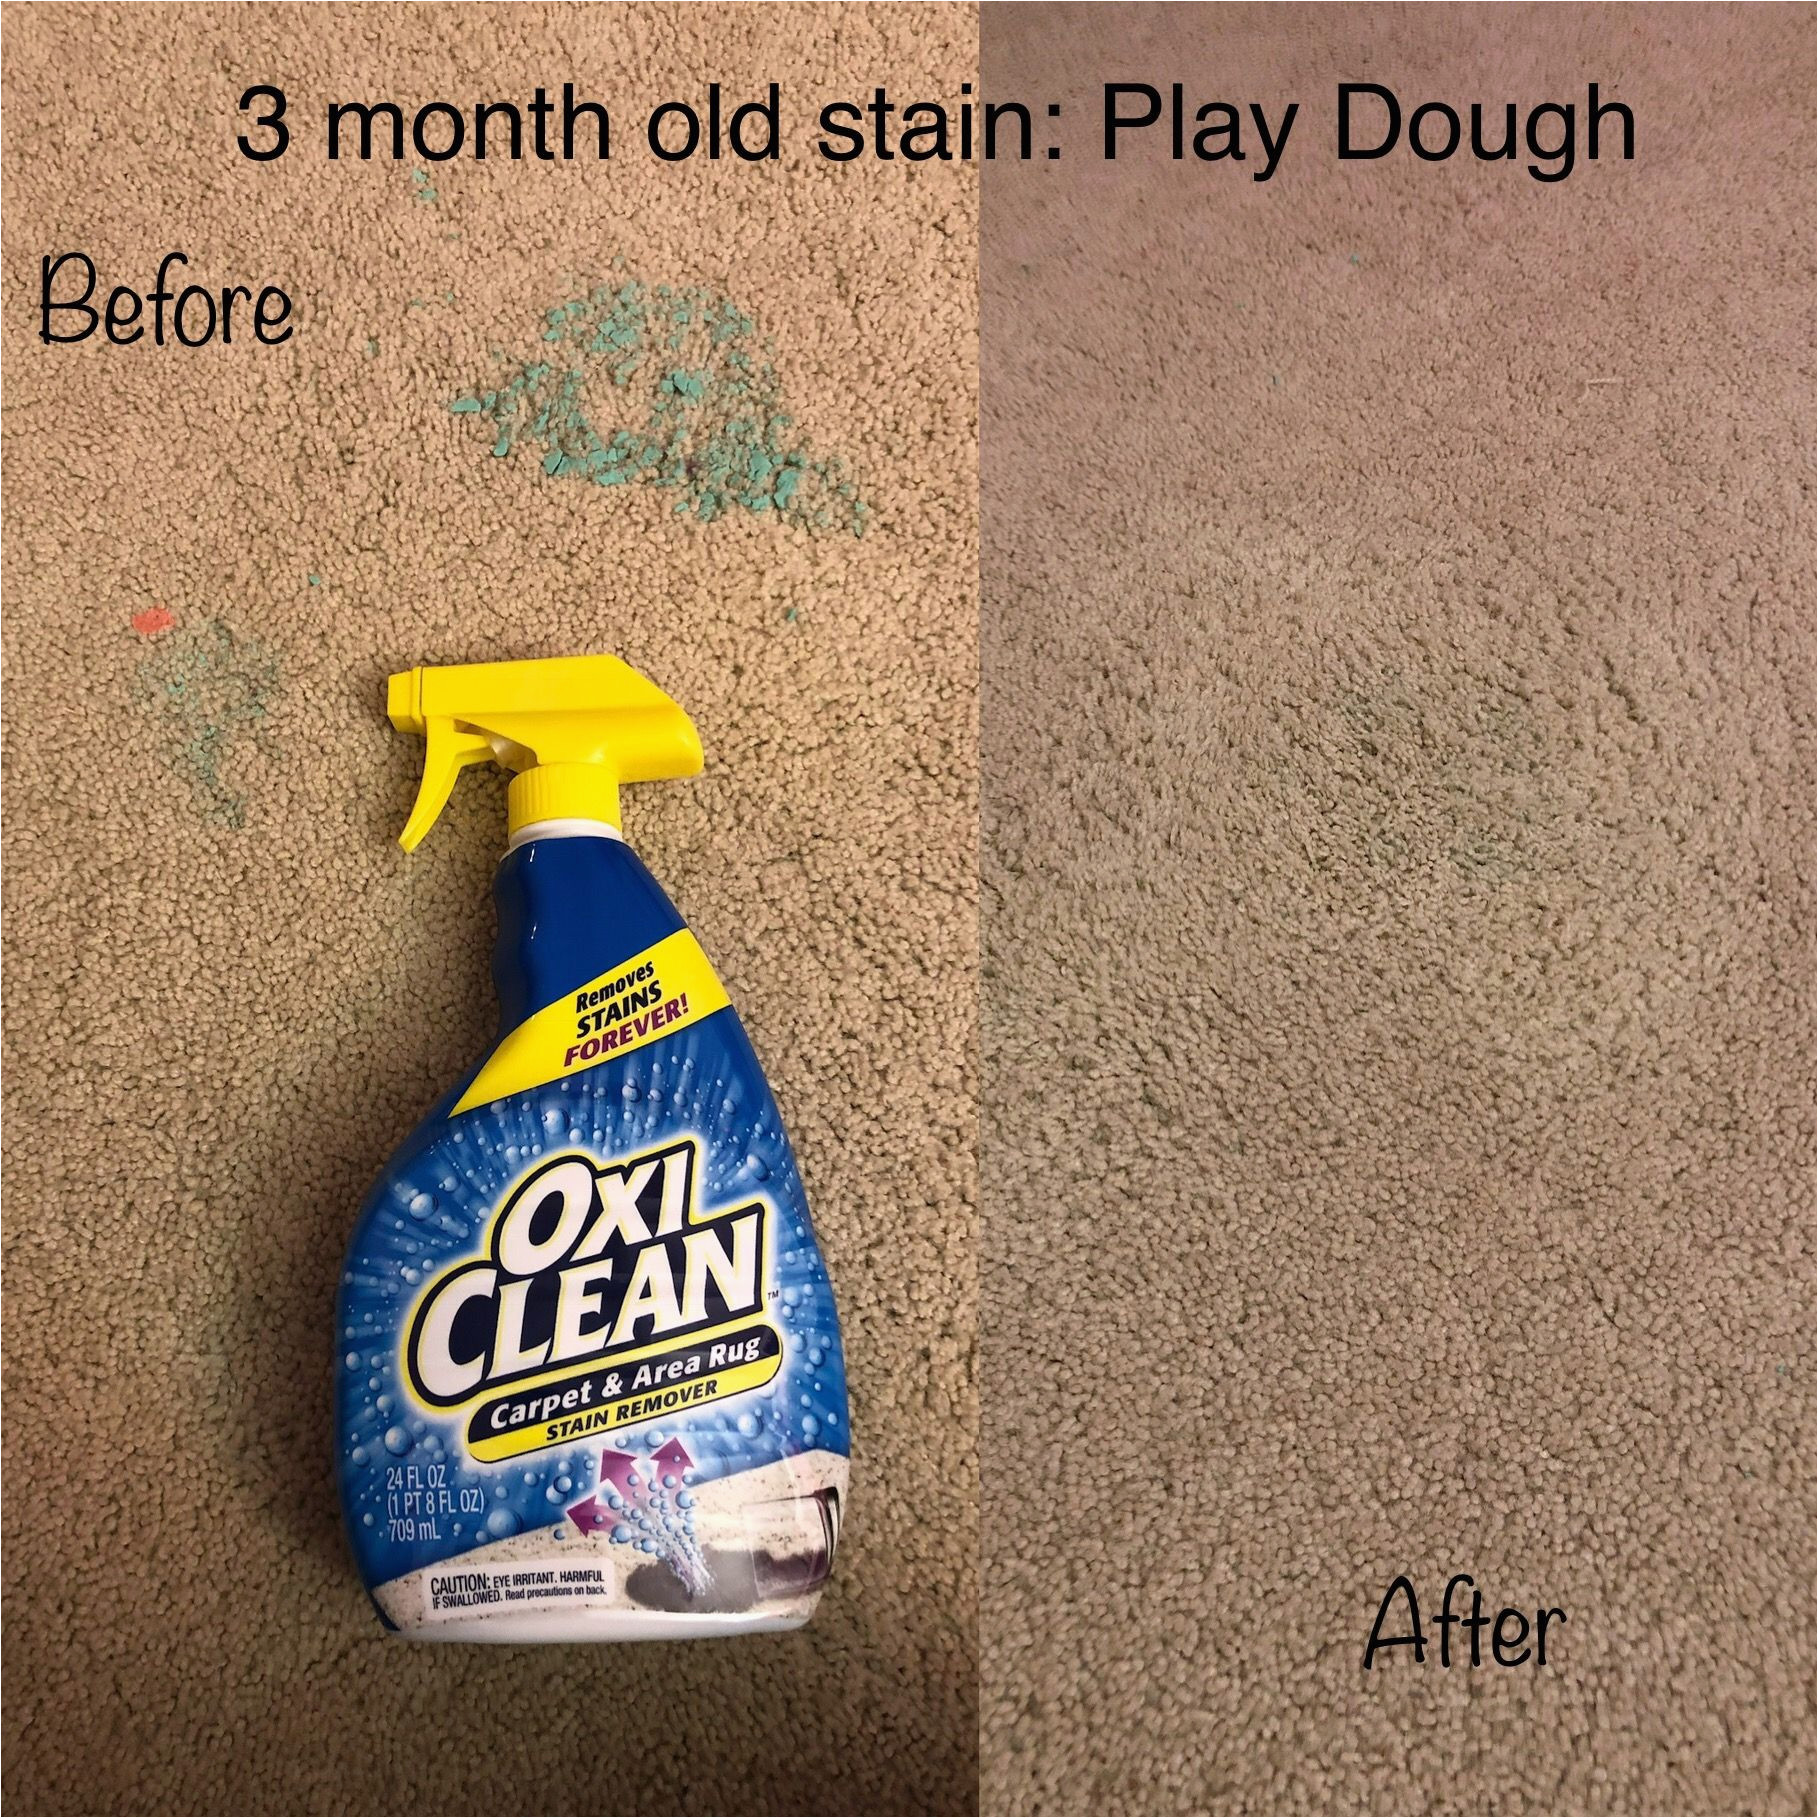 Oxiclean Carpet and area Rug Stain Remover Smiley360 Mission: Oxicleanâ¢ Carpet & area Rug Stain Remover …